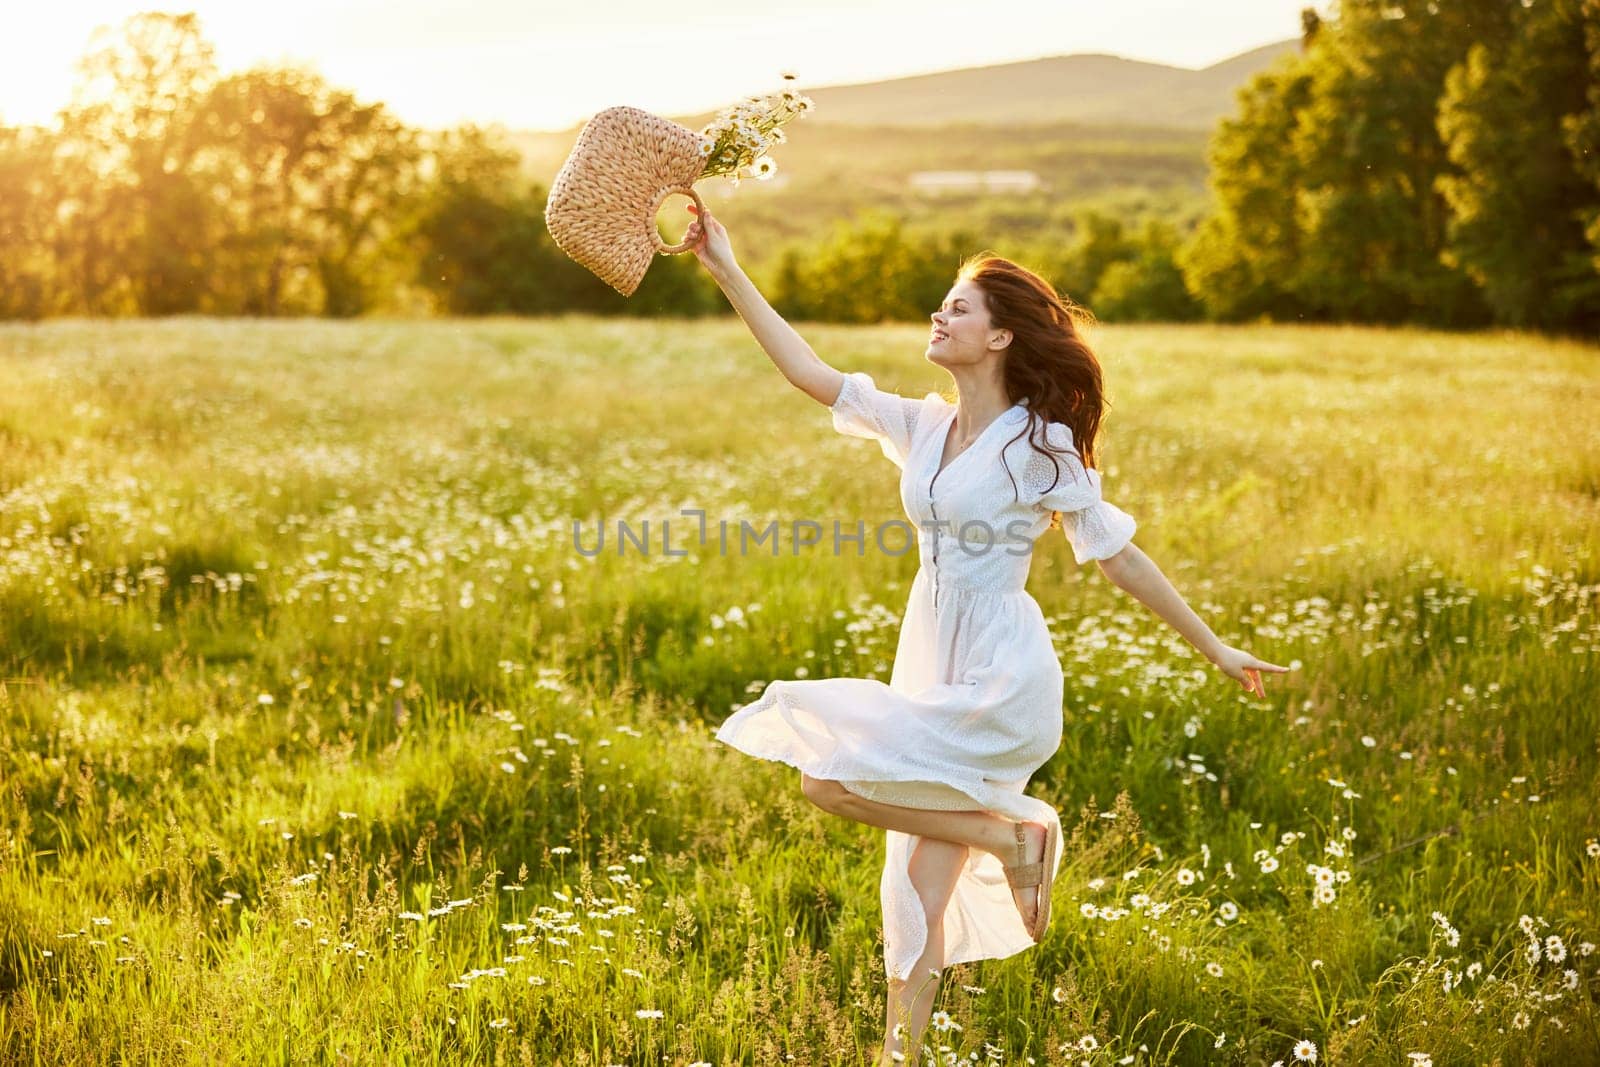 a woman in a light, long dress jumps in a field with a basket of daisies in her hands by Vichizh